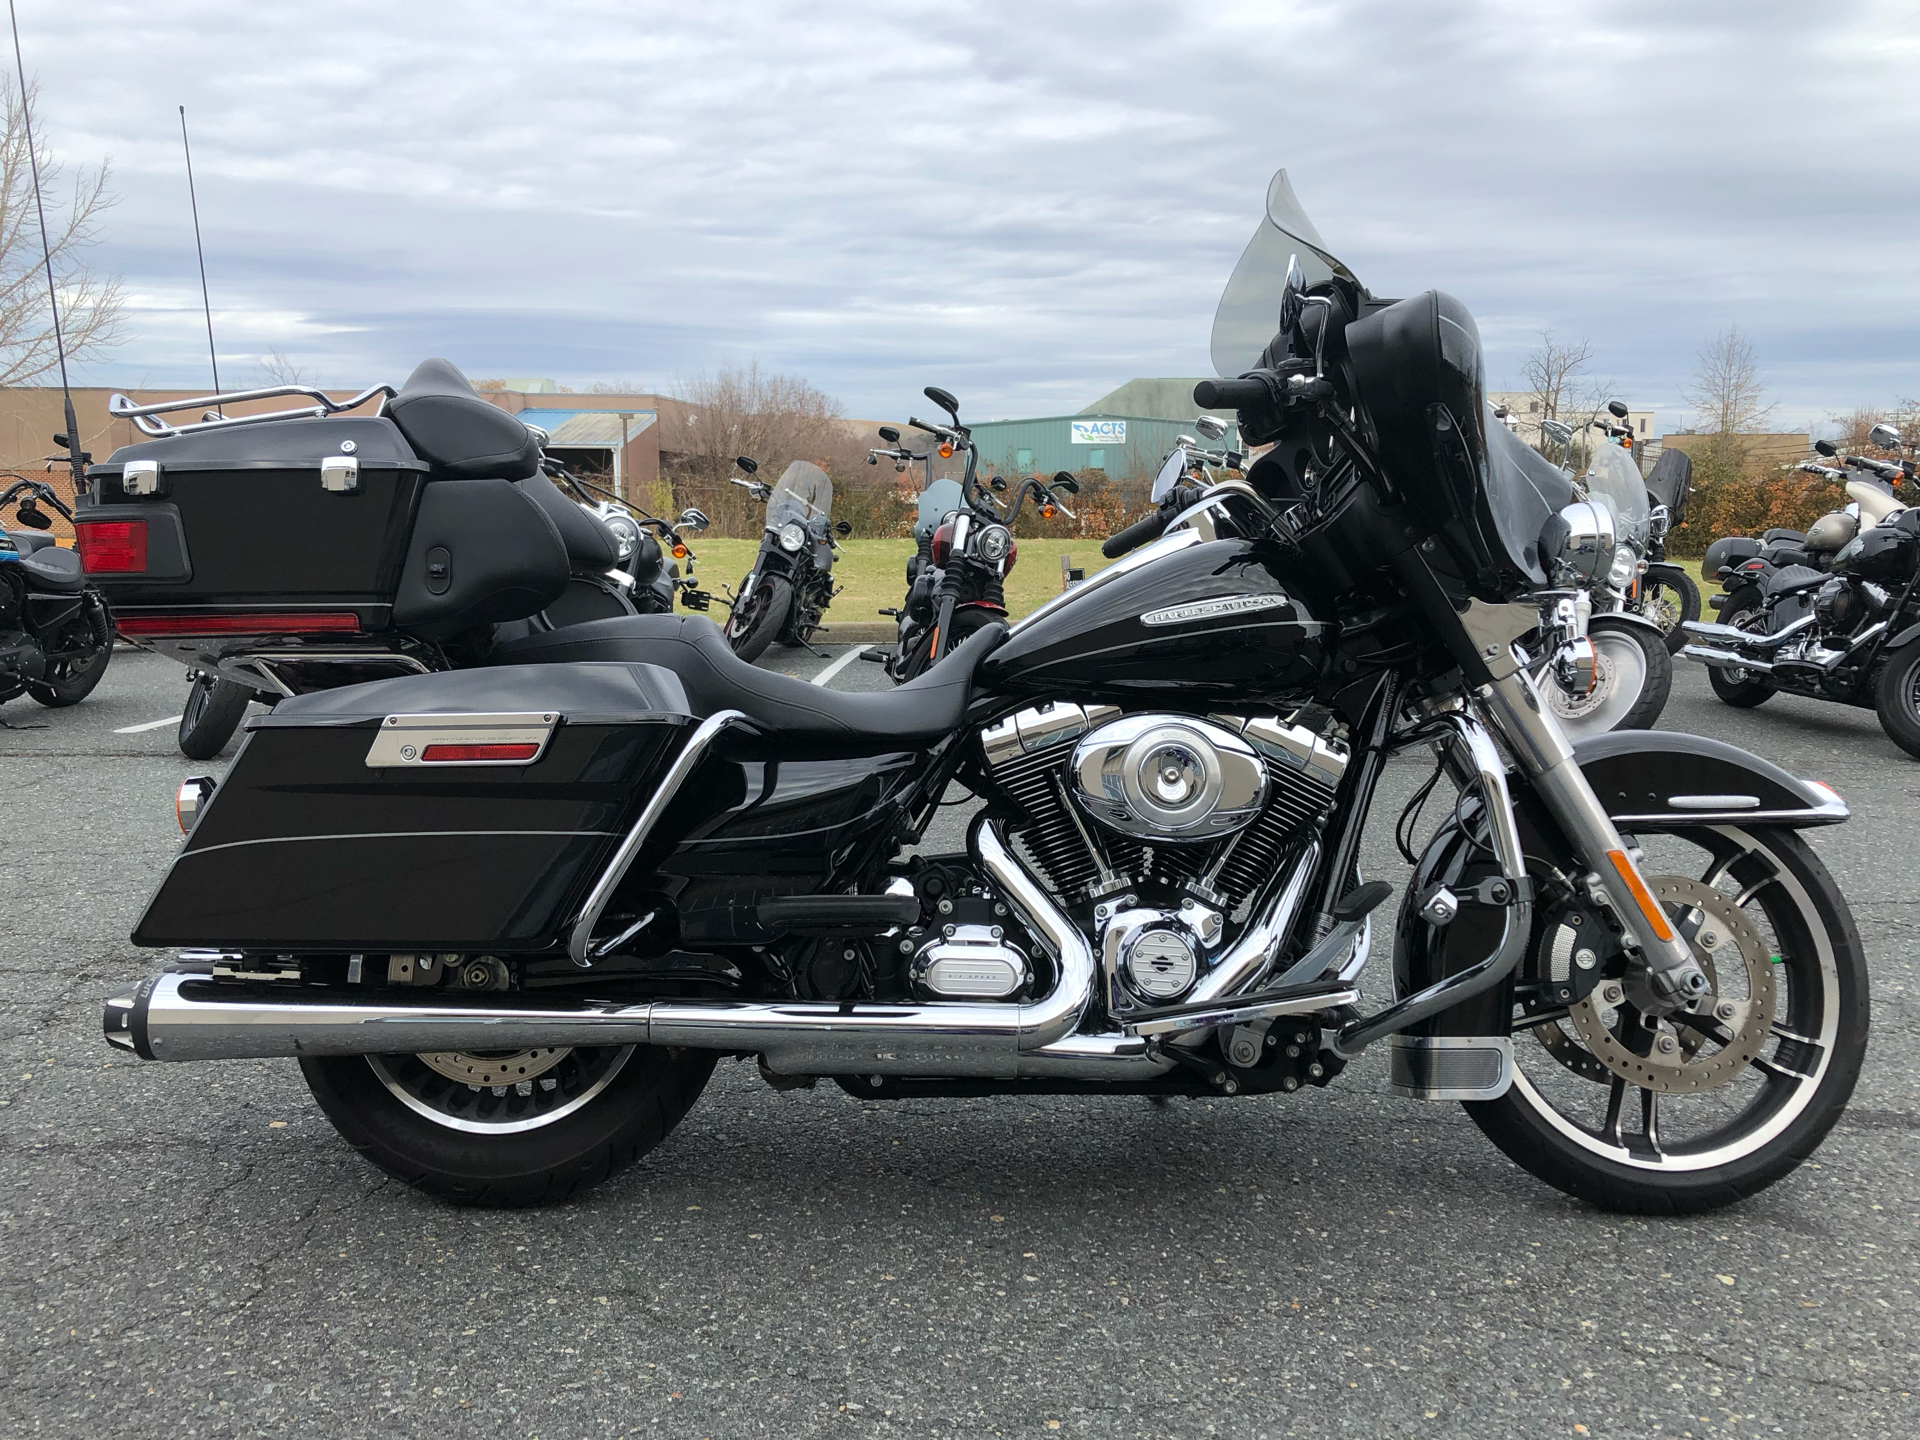 2012 Harley-Davidson Electra Glide® Ultra Limited in Dumfries, Virginia - Photo 1